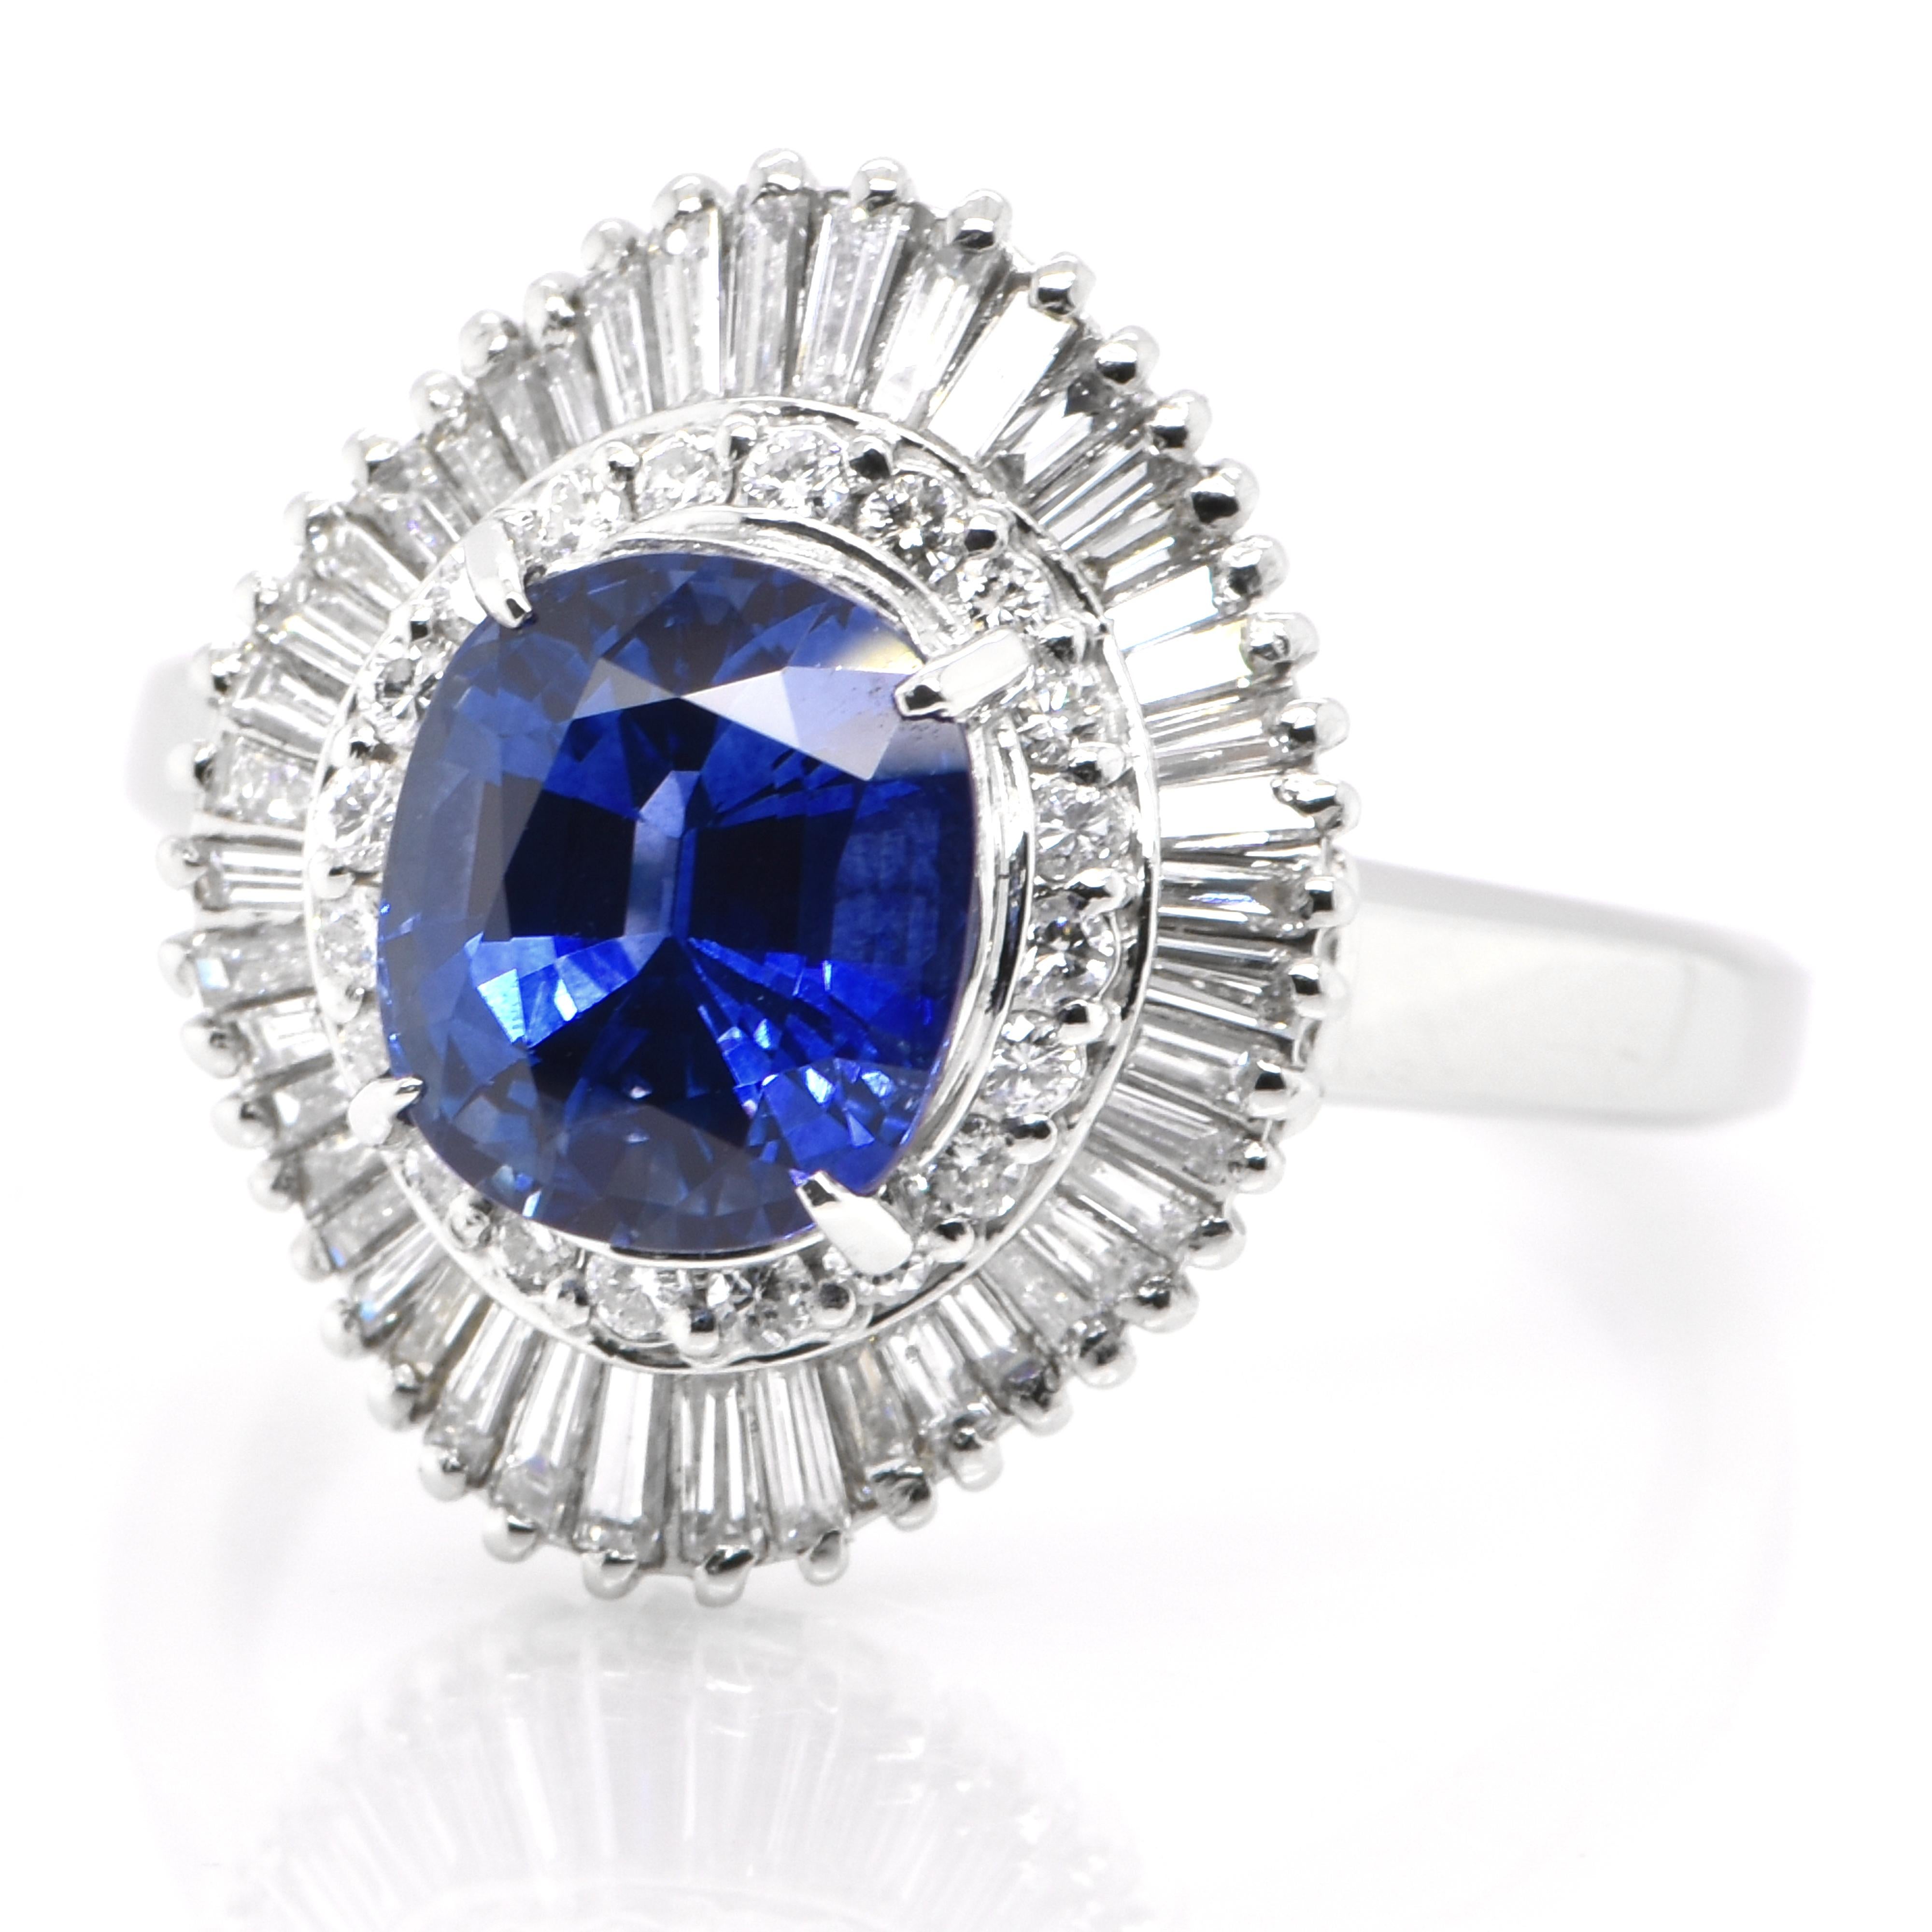 A beautiful ring featuring 3.04 Carat Natural Blue Sapphire and 0.88 Carats Diamond Accents set in Platinum. Sapphires have extraordinary durability - they excel in hardness as well as toughness and durability making them very popular in jewelry.